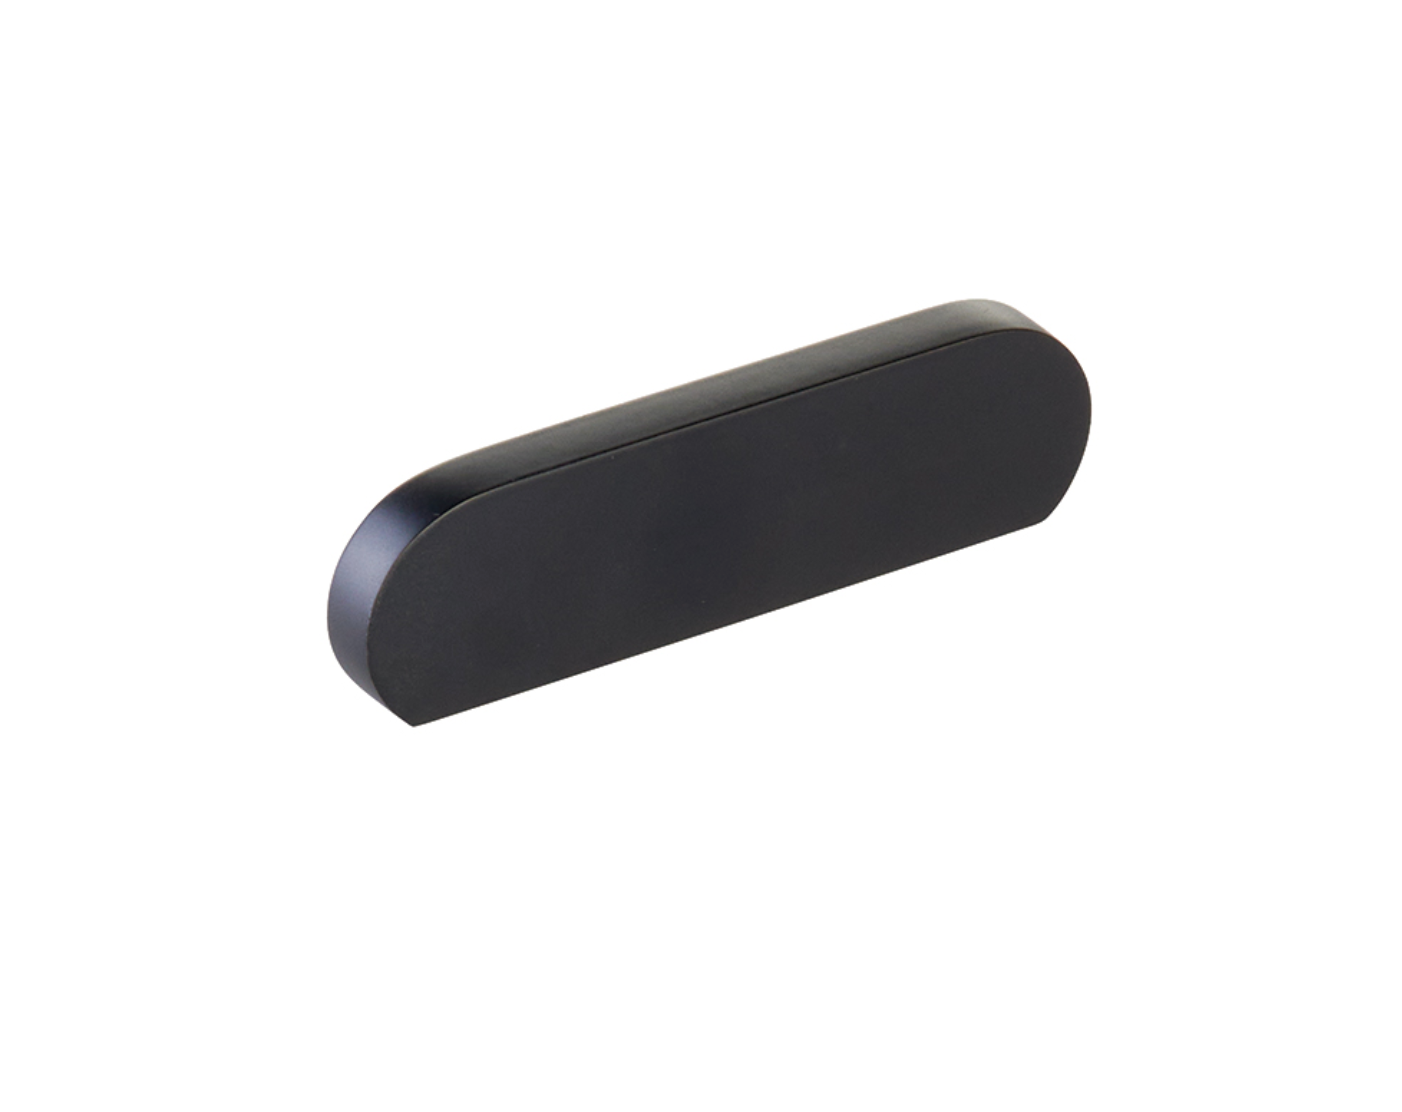 Matte Black "Bit" Rounded Drawer Pulls and Cabinet Knobs - Industry Hardware